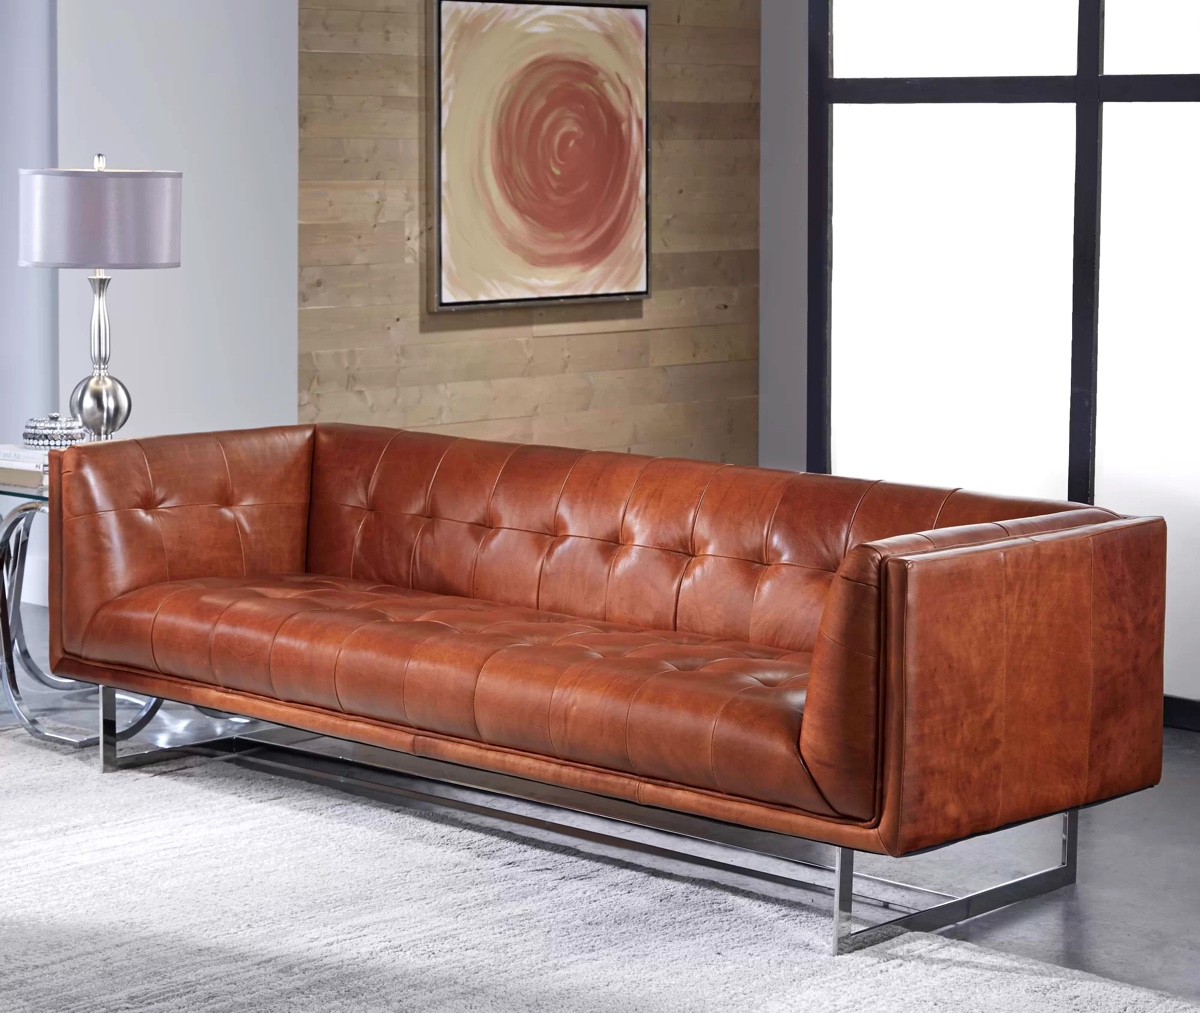 30 Mid-Century Modern Sofas That Make Your Lounge Look The Era